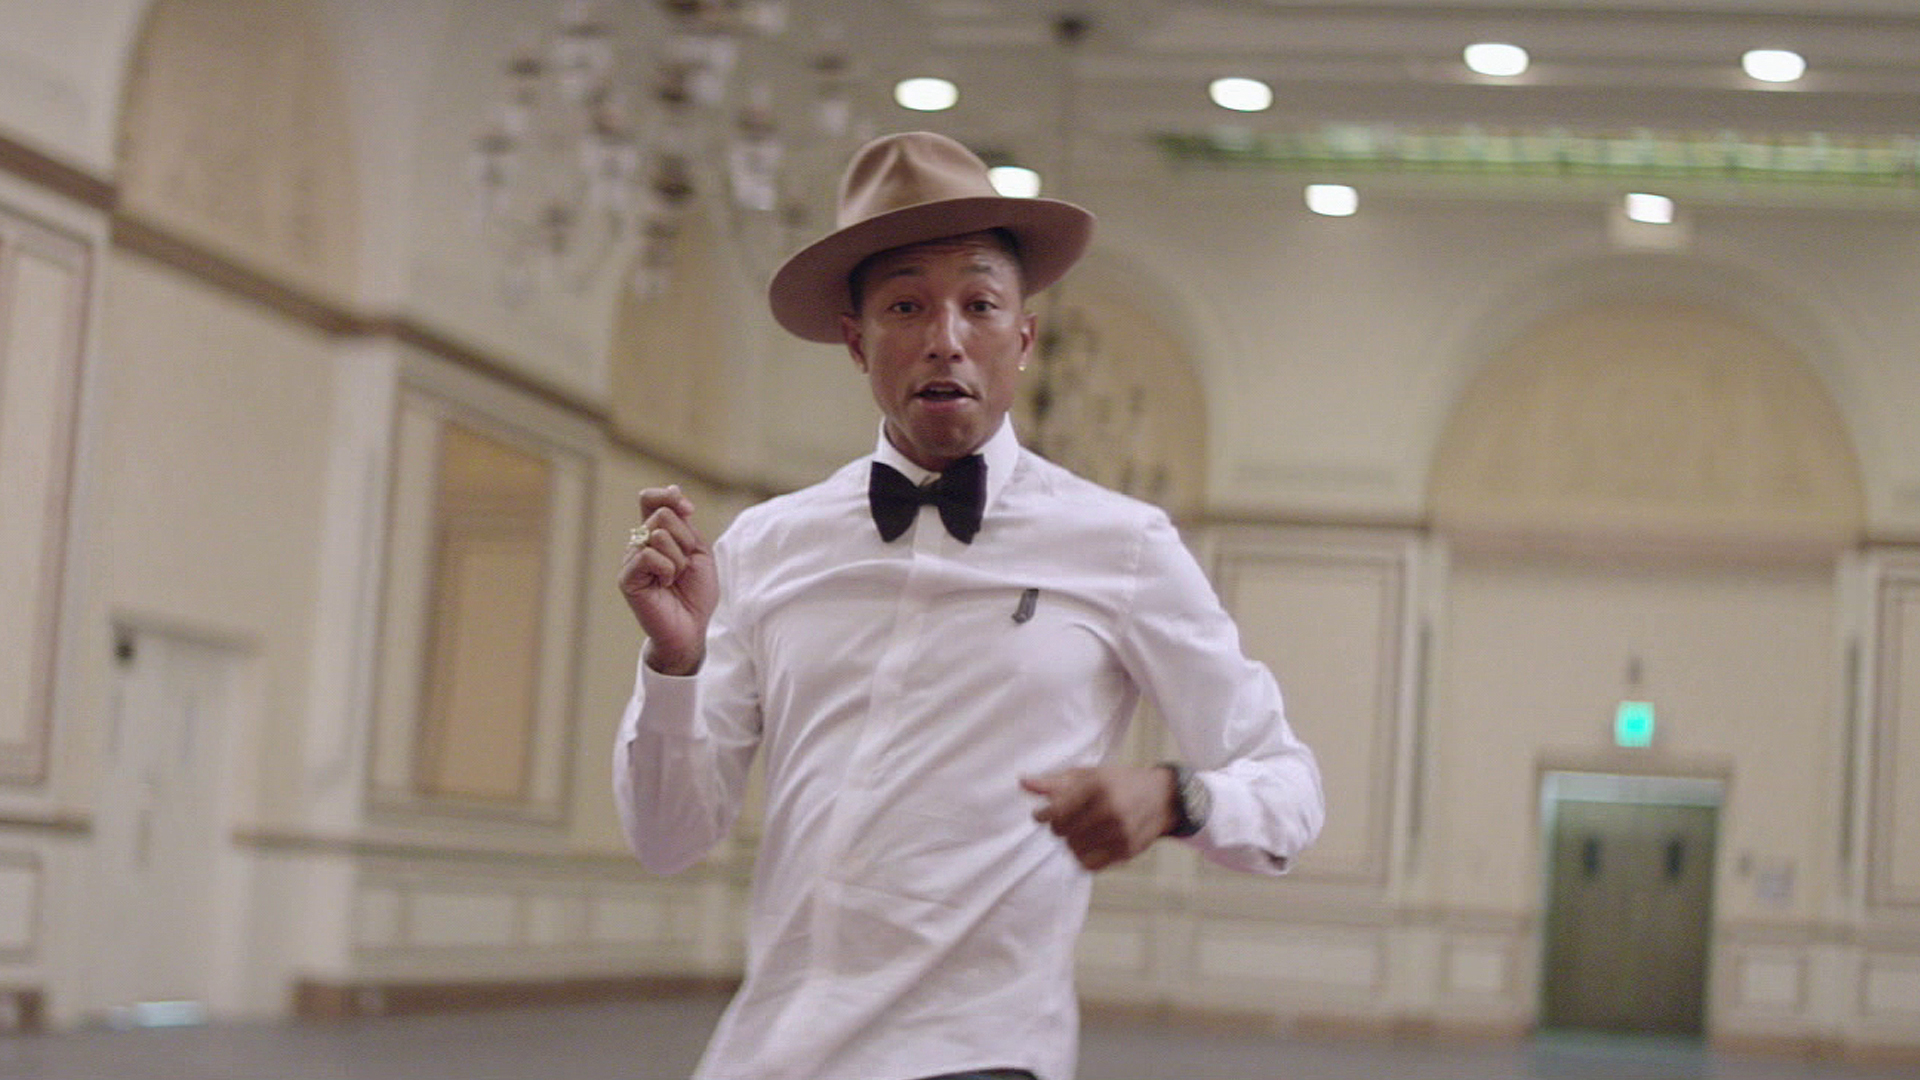 Pharrell Williams Has His Own Creepy & Expensive AF Action Figure